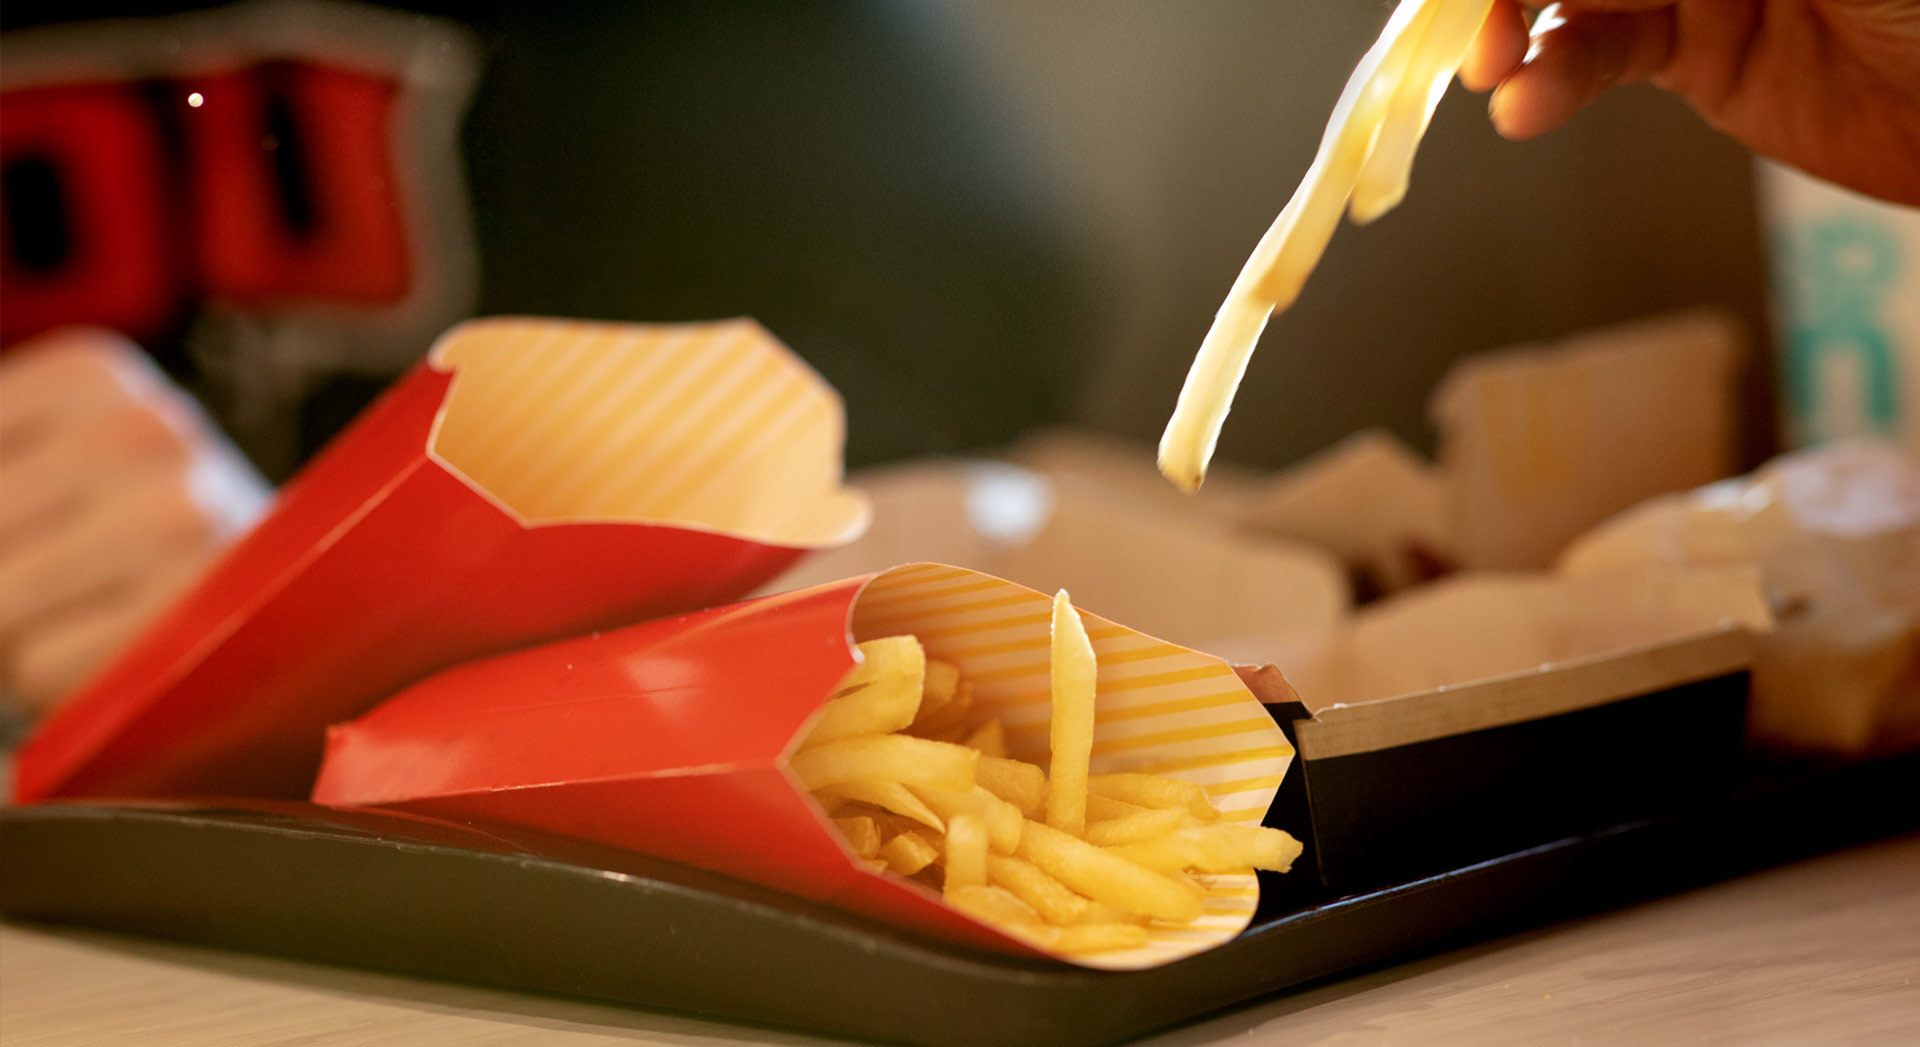 Know Our Food - How much do different batches of McDonald's fries vary in nutritional content, based on how the potatoes were grown?